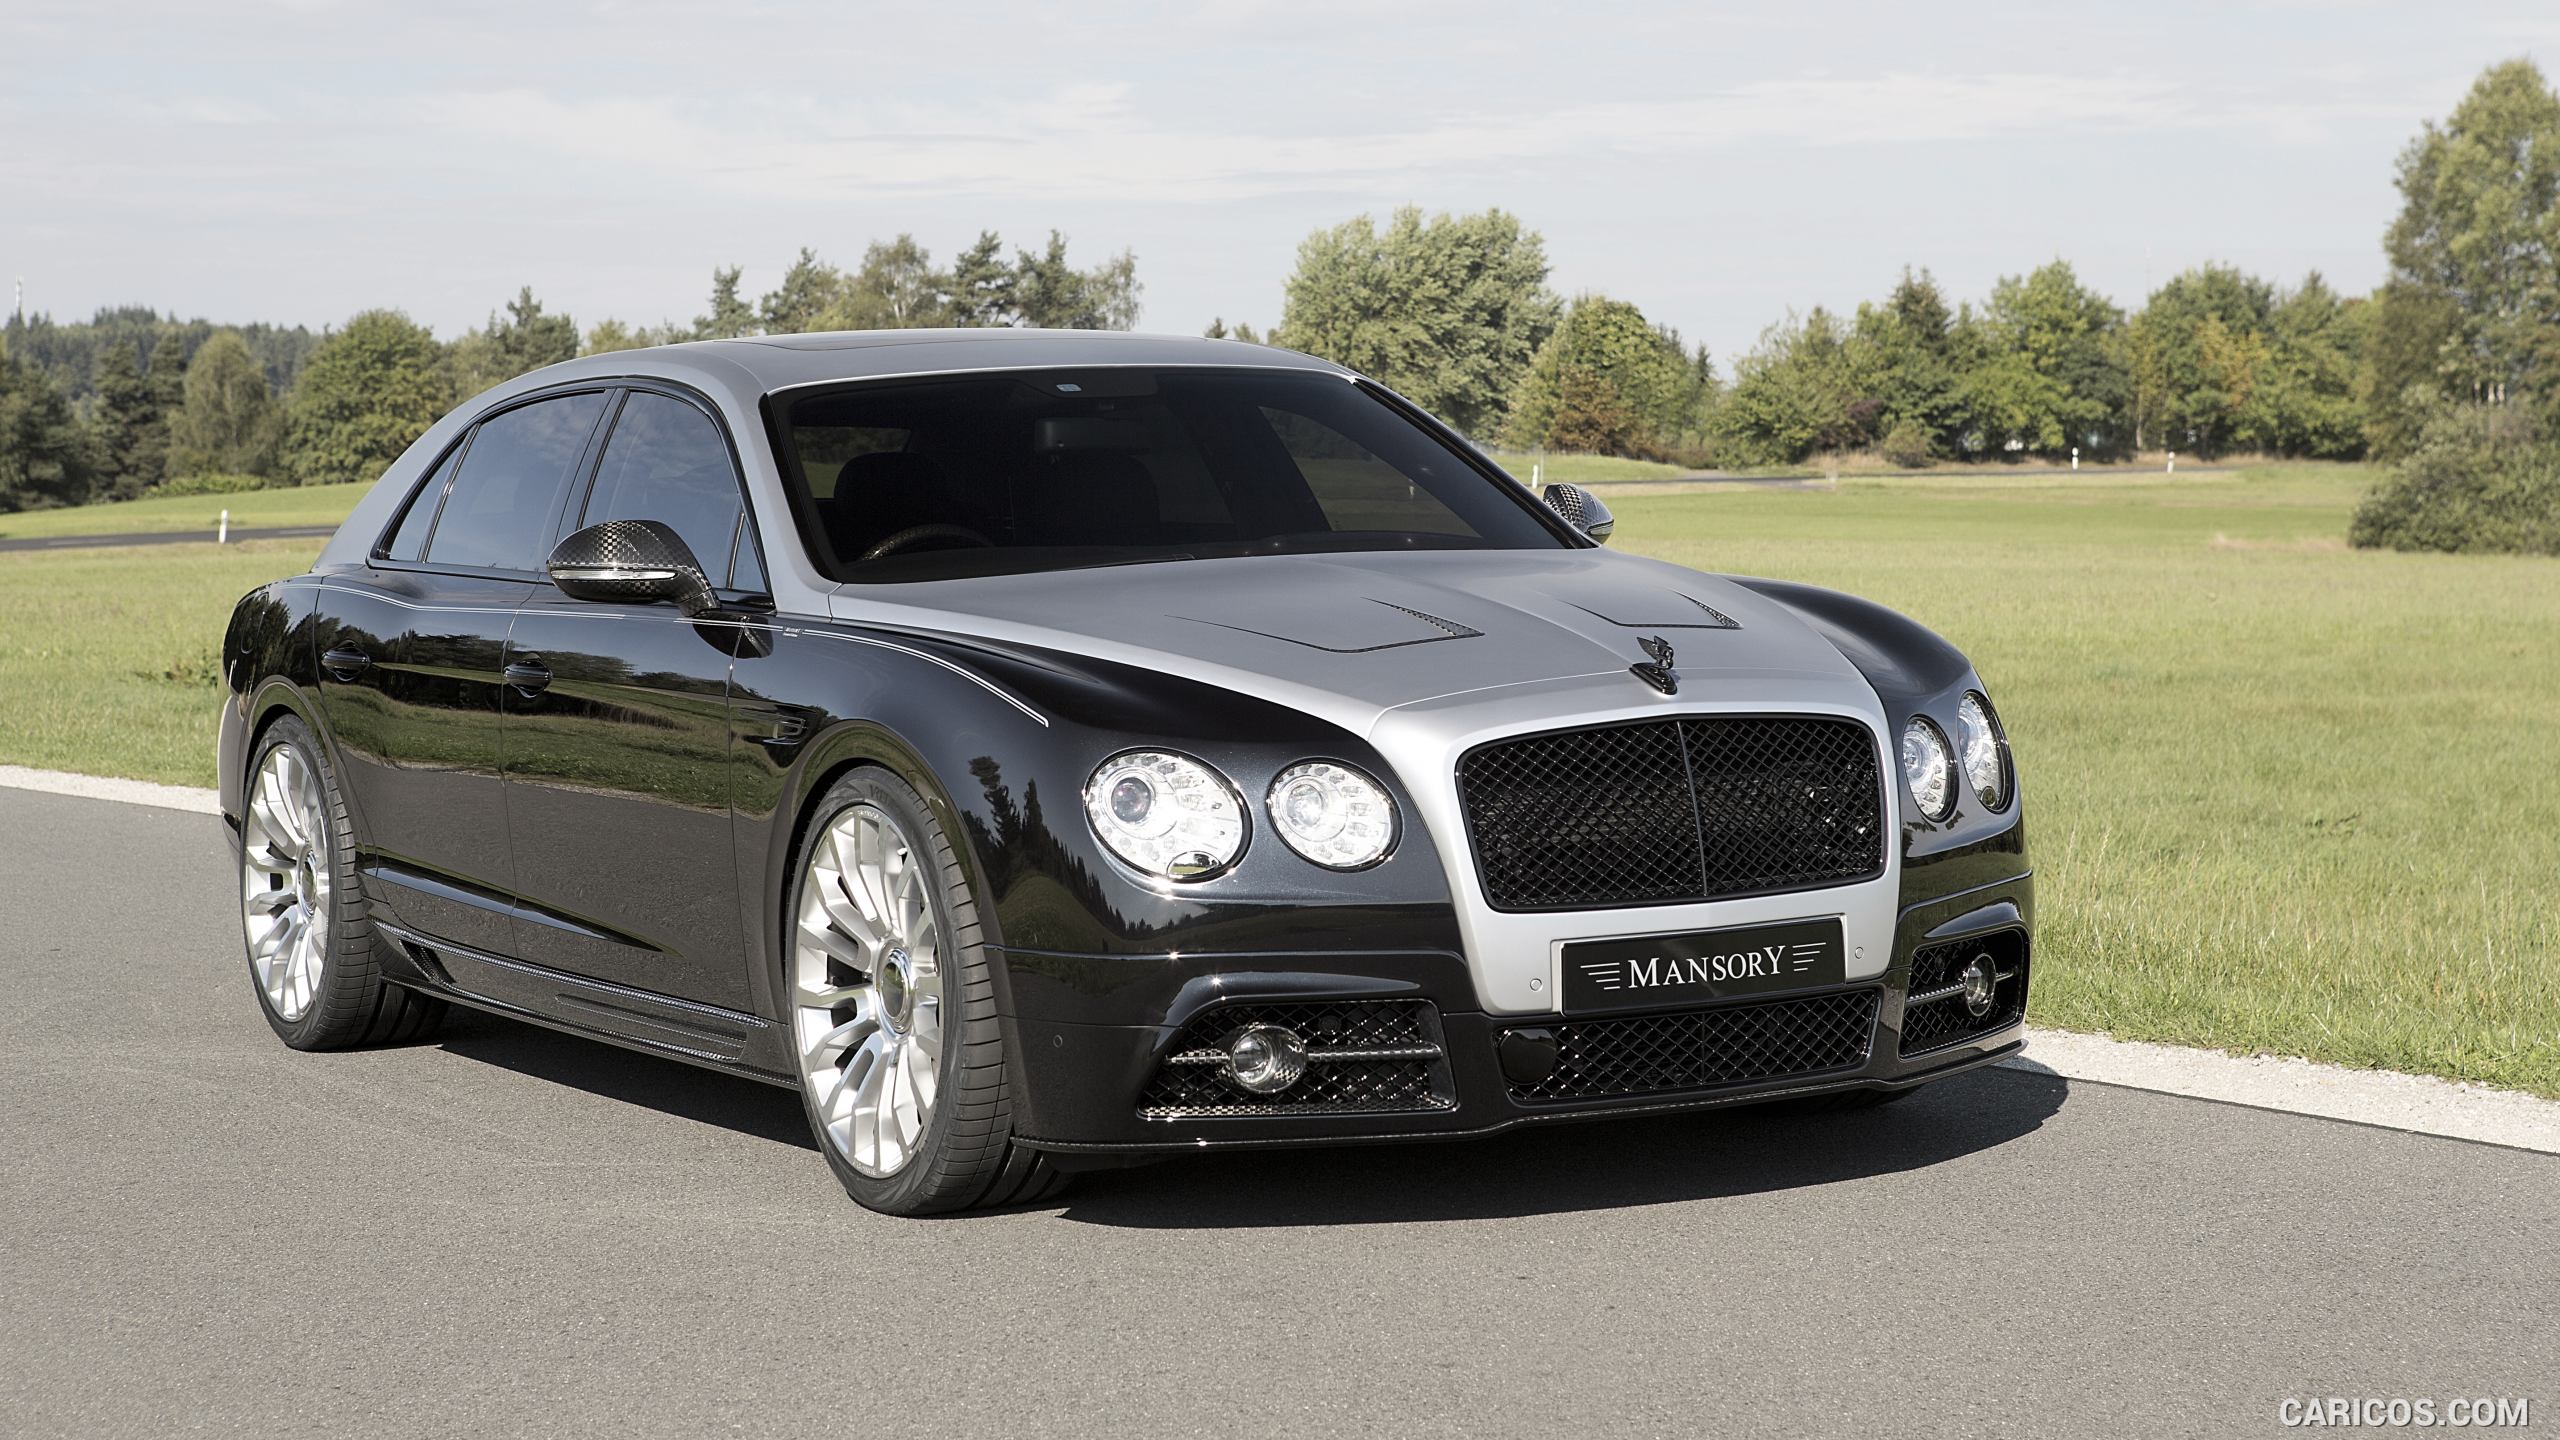 2015 MANSORY Bentley Flying Spur - Front, #1 of 9